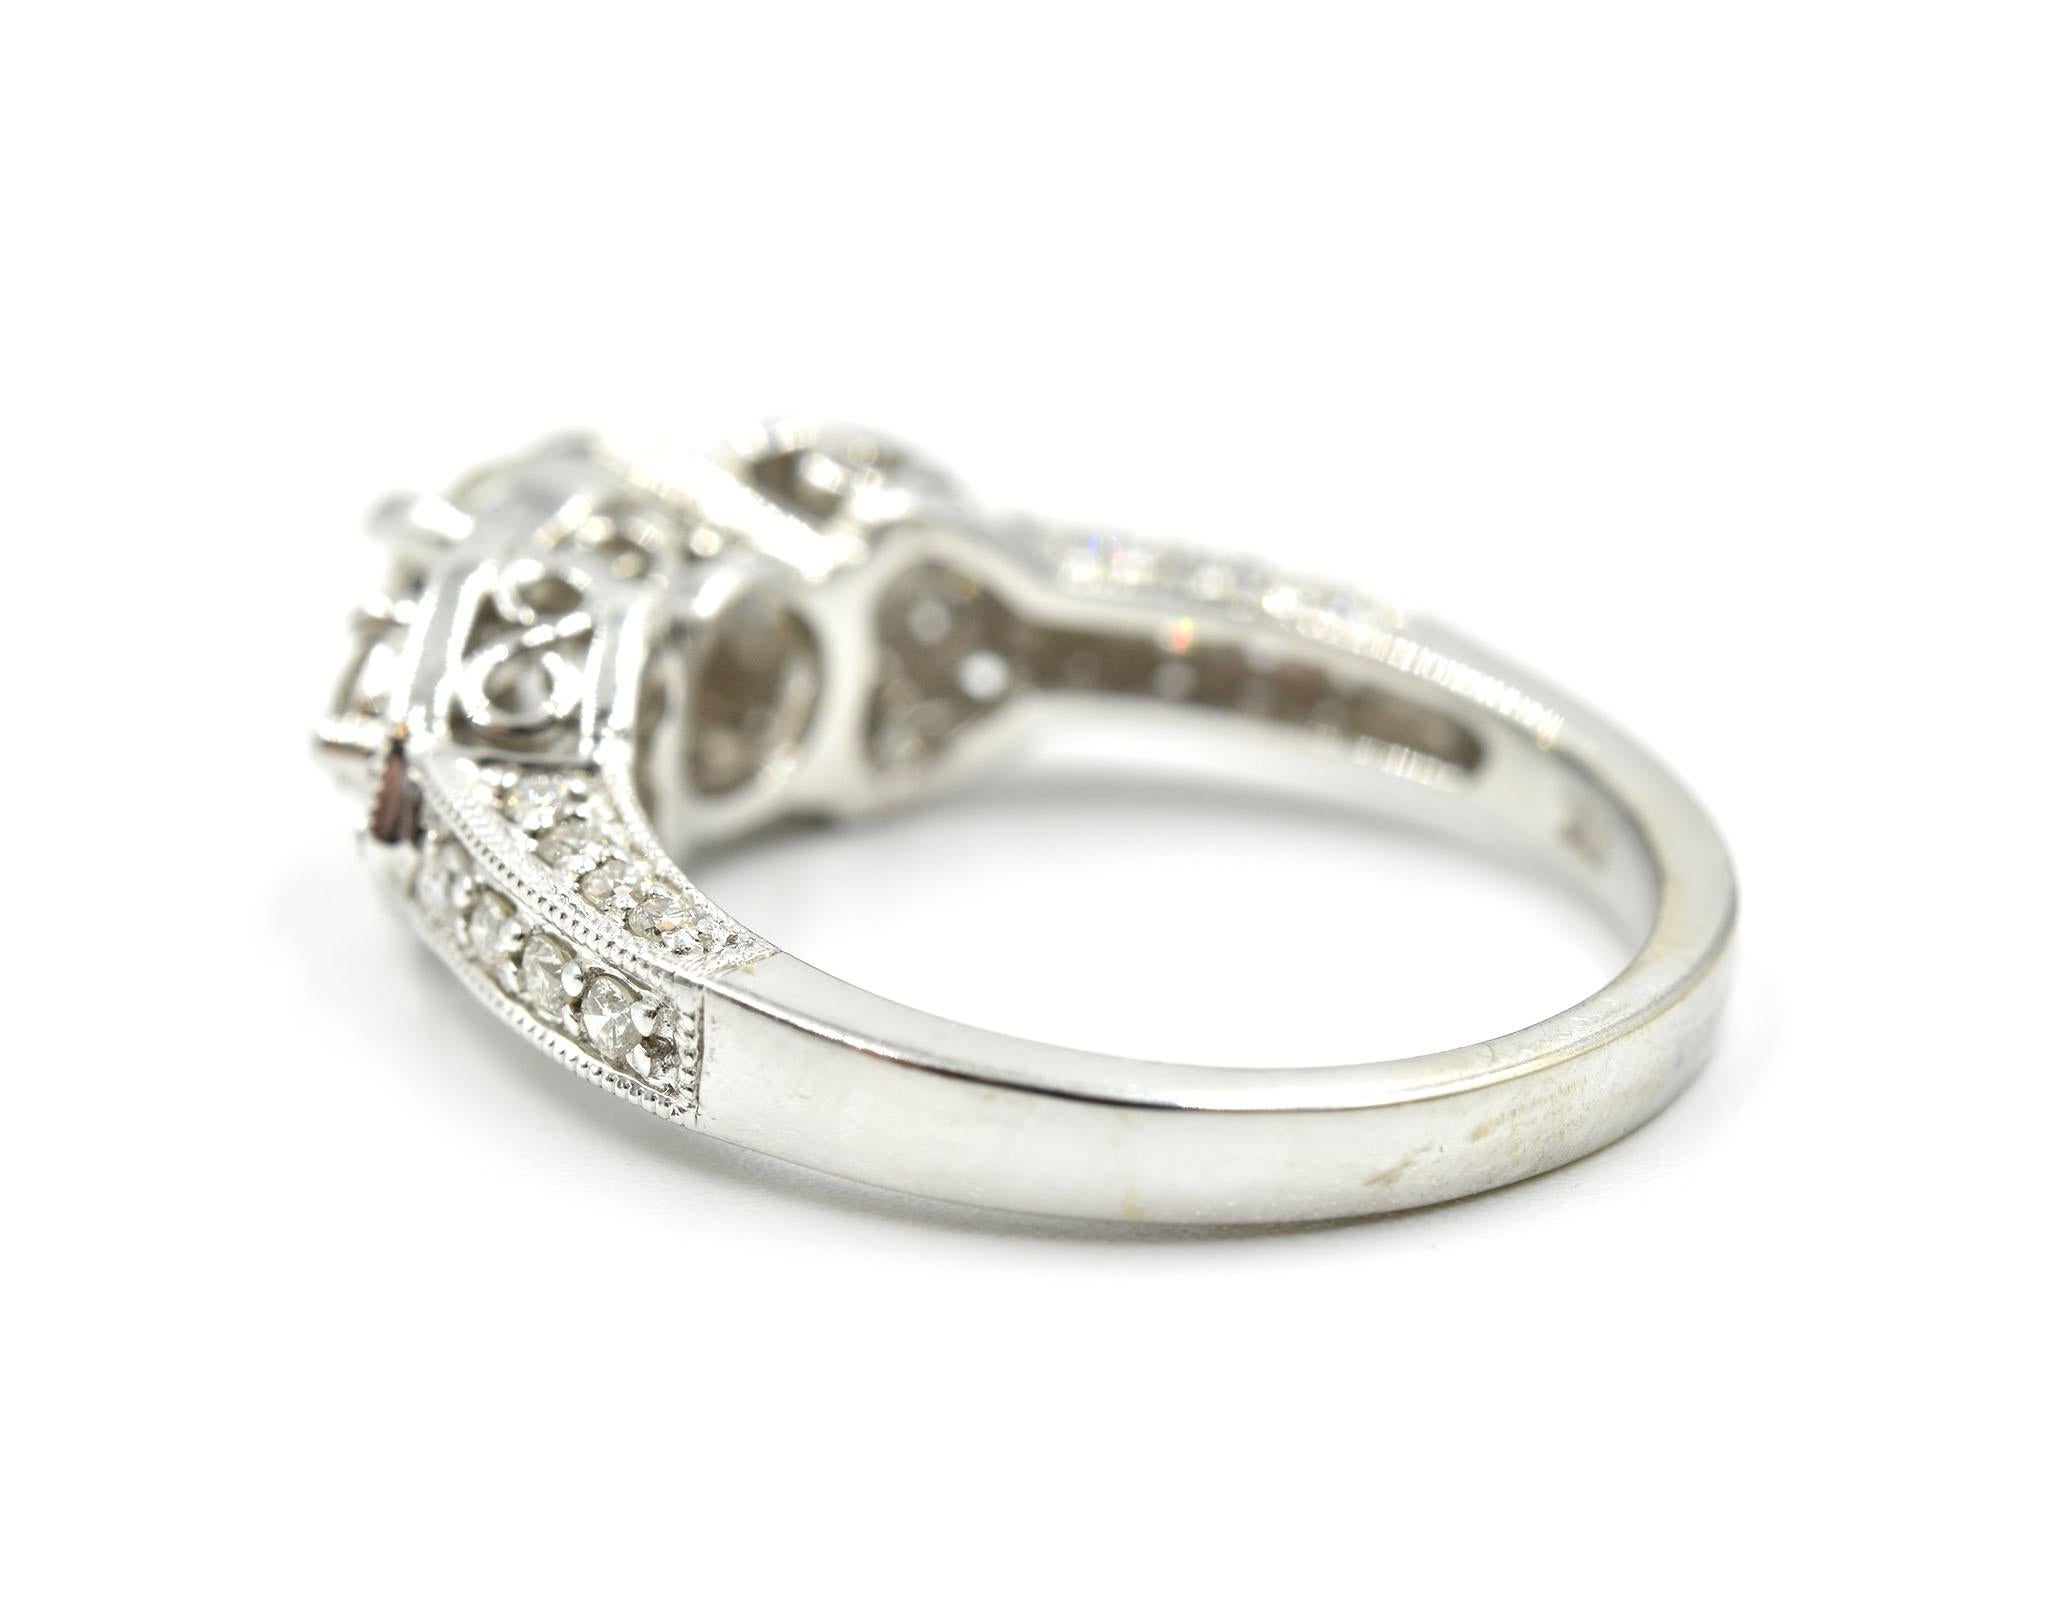 14 Karat White Gold and 0.91 Carat European Diamond Ring In Excellent Condition For Sale In Scottsdale, AZ